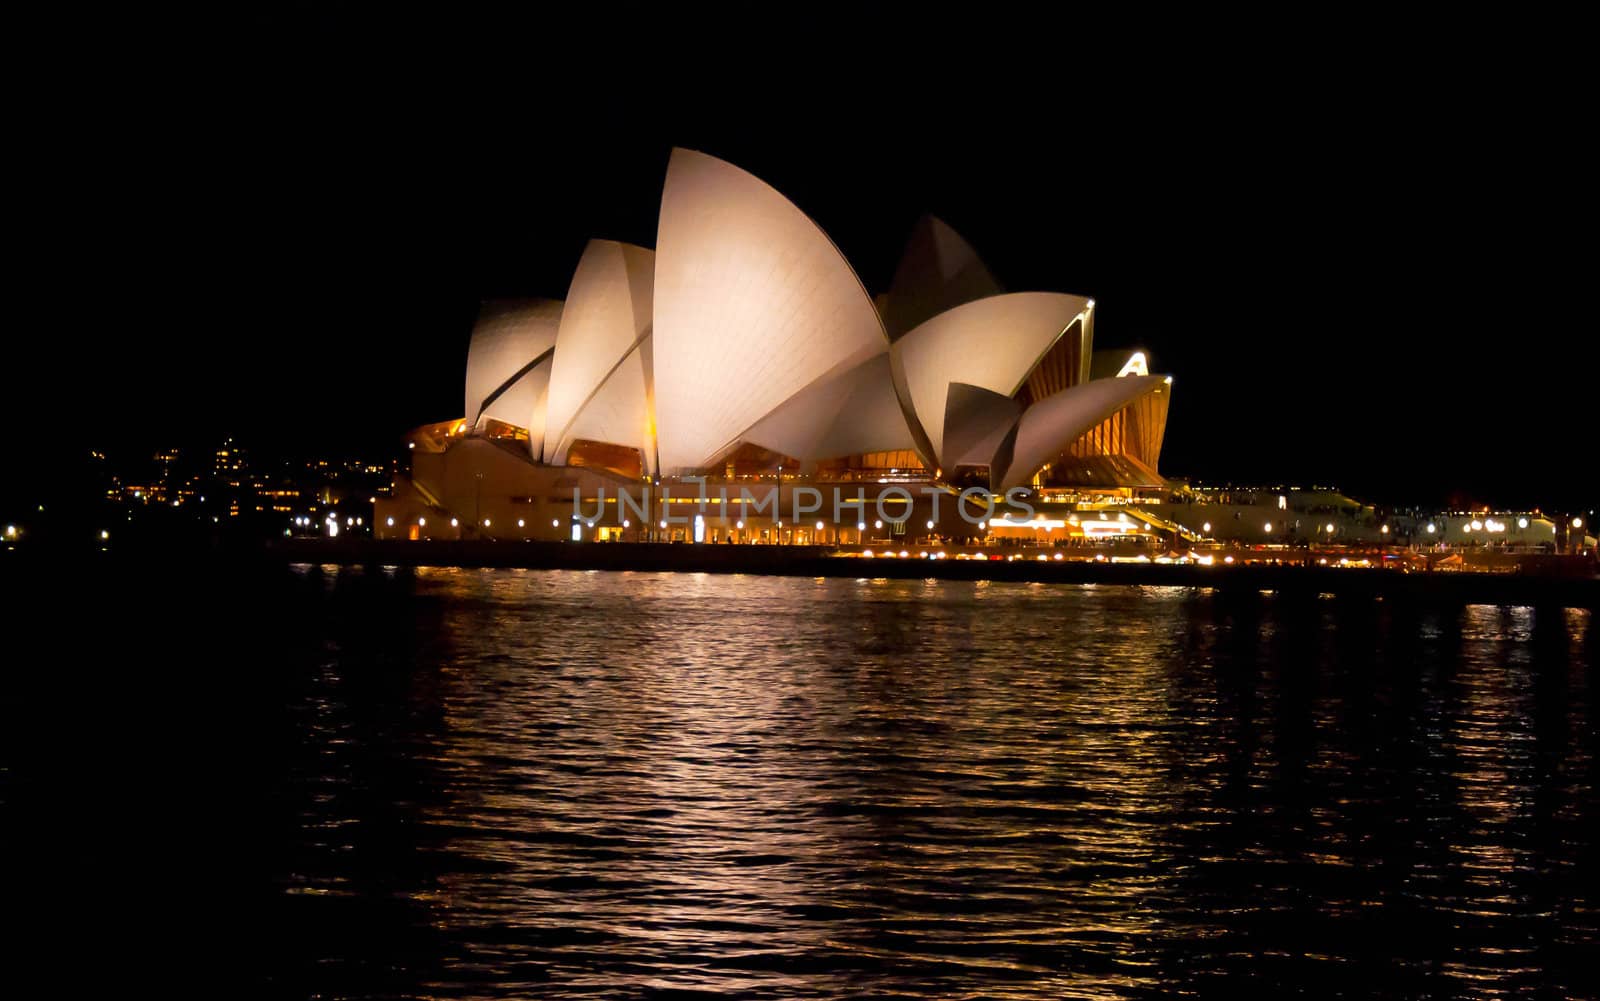 SYDNEY, AUSTRALIA  AUGUST 18: view of the Opera House in Sydney bay on August 18, 2010 in Sydney, Australia. The Opera House Theatre is a famous landmark for Sydney and for whole australia